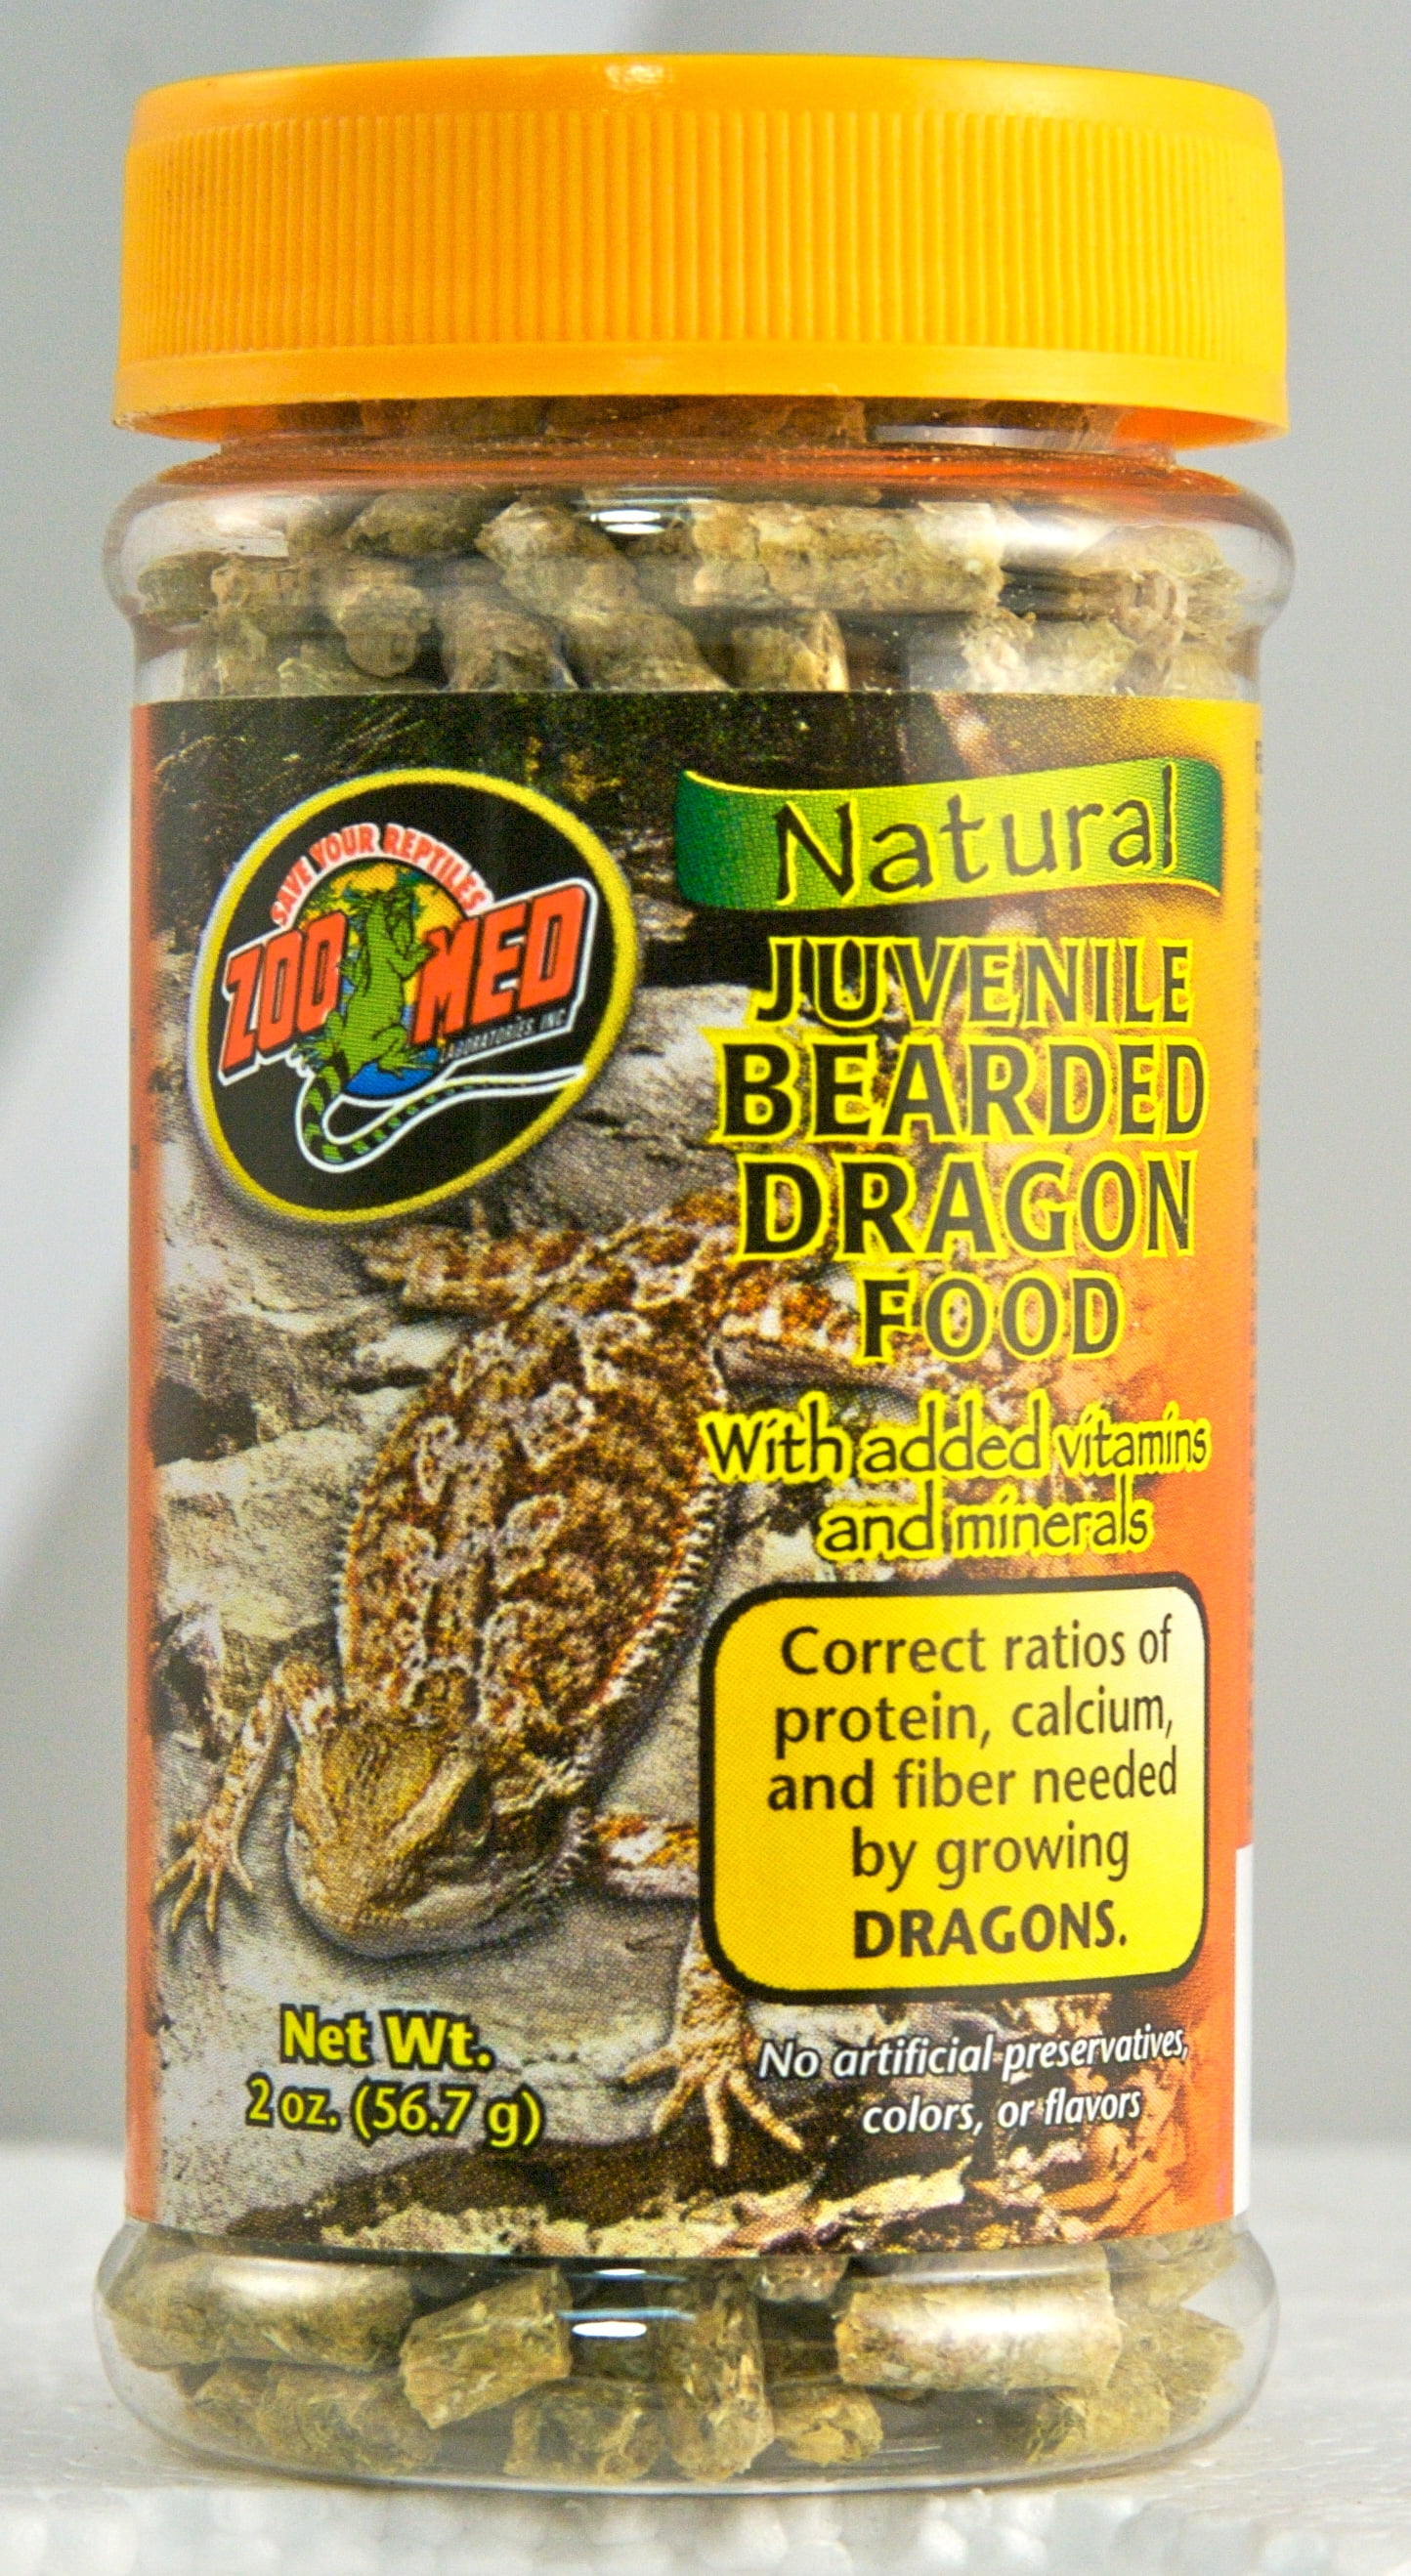 ZOO MED NATURAL JUVENILE BEARDED DRAGON FOOD NOW BACK IN STOCK 283g 